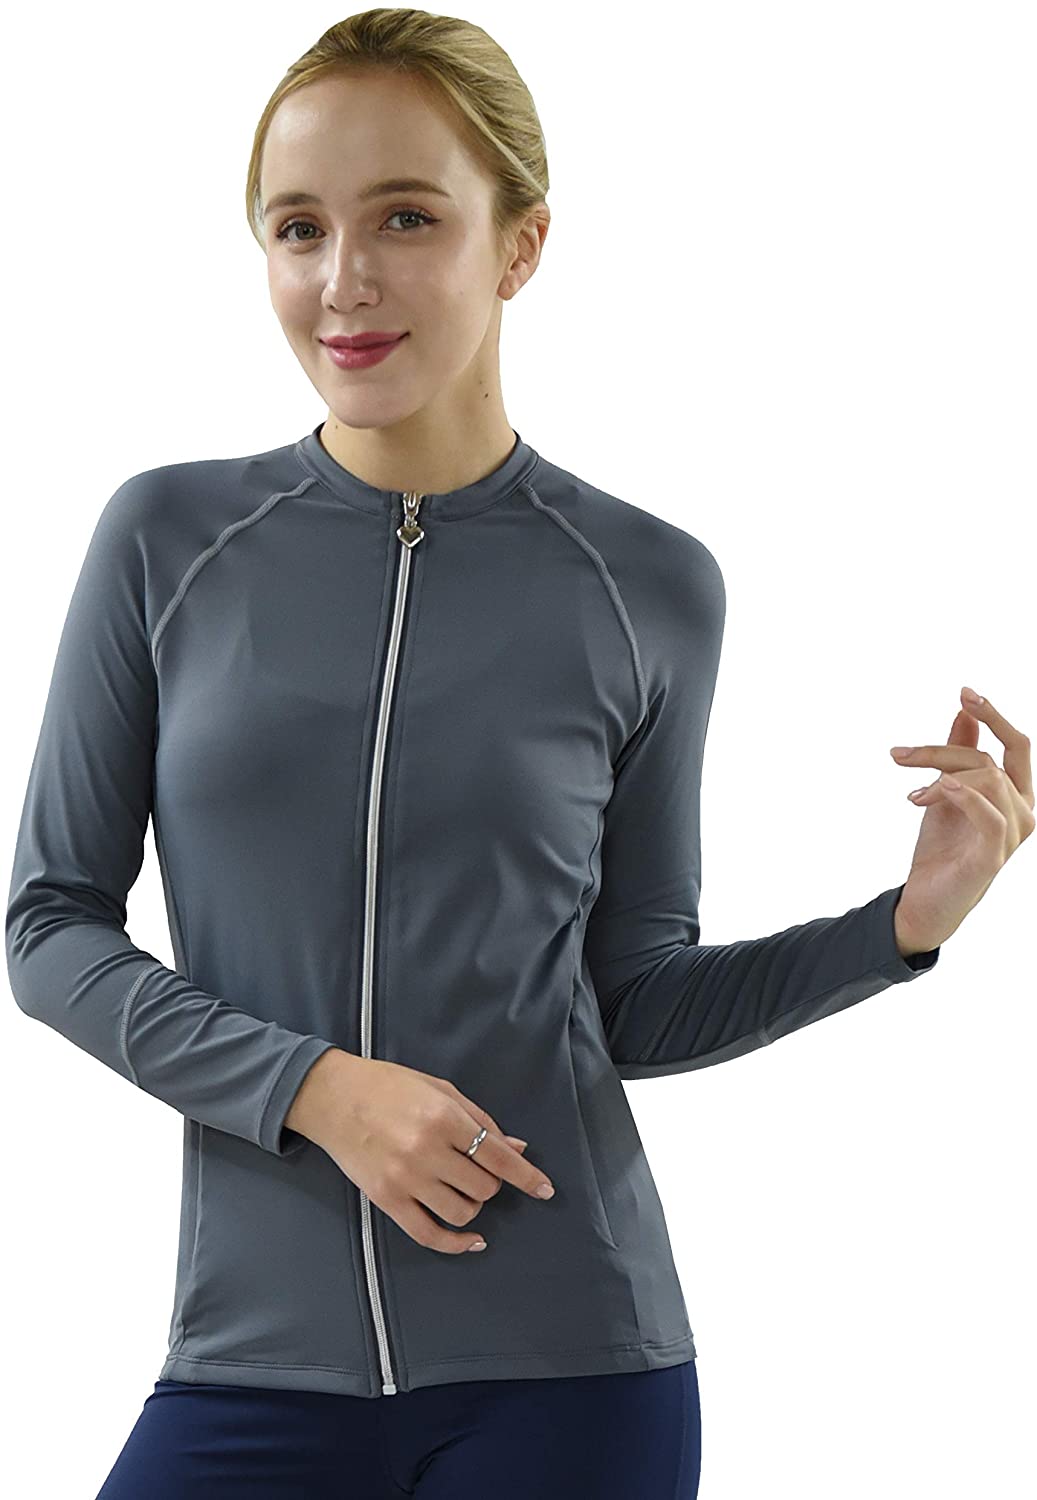 JZWRGT Rash Guard Front Zip Up UV Long Sleeve Swimsuit Top Private Island Women UPF 50 